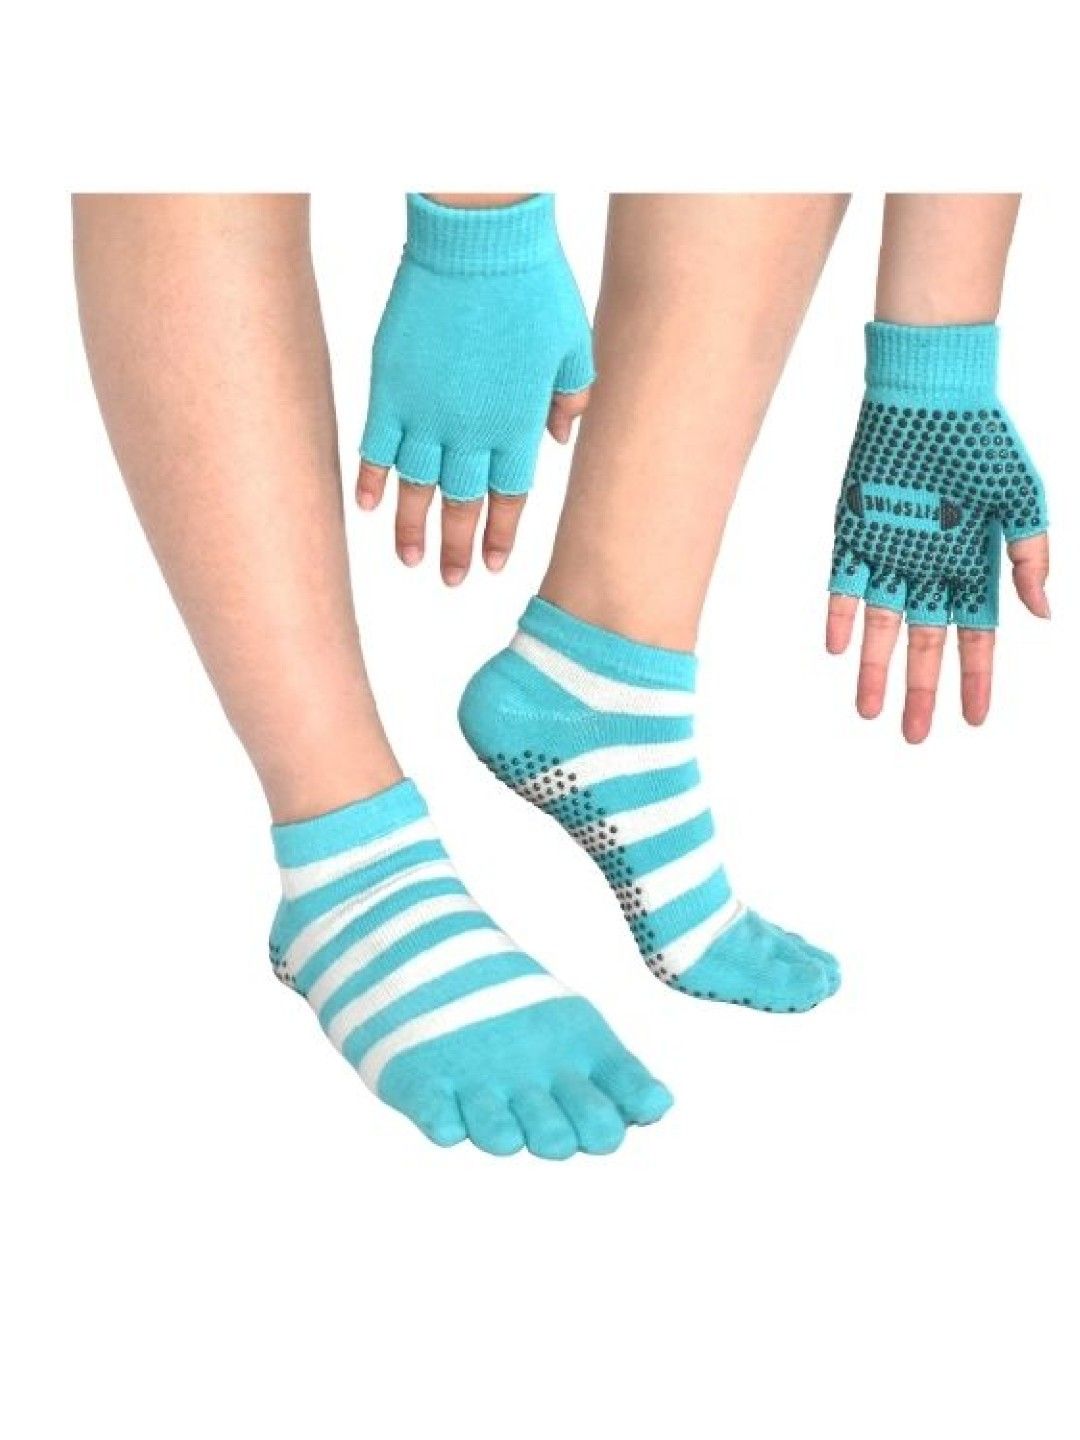 Sunbeams Lifestyle Fitspire Yoga Socks and Gloves Cotton Elastic Ribbon Workout Equipment